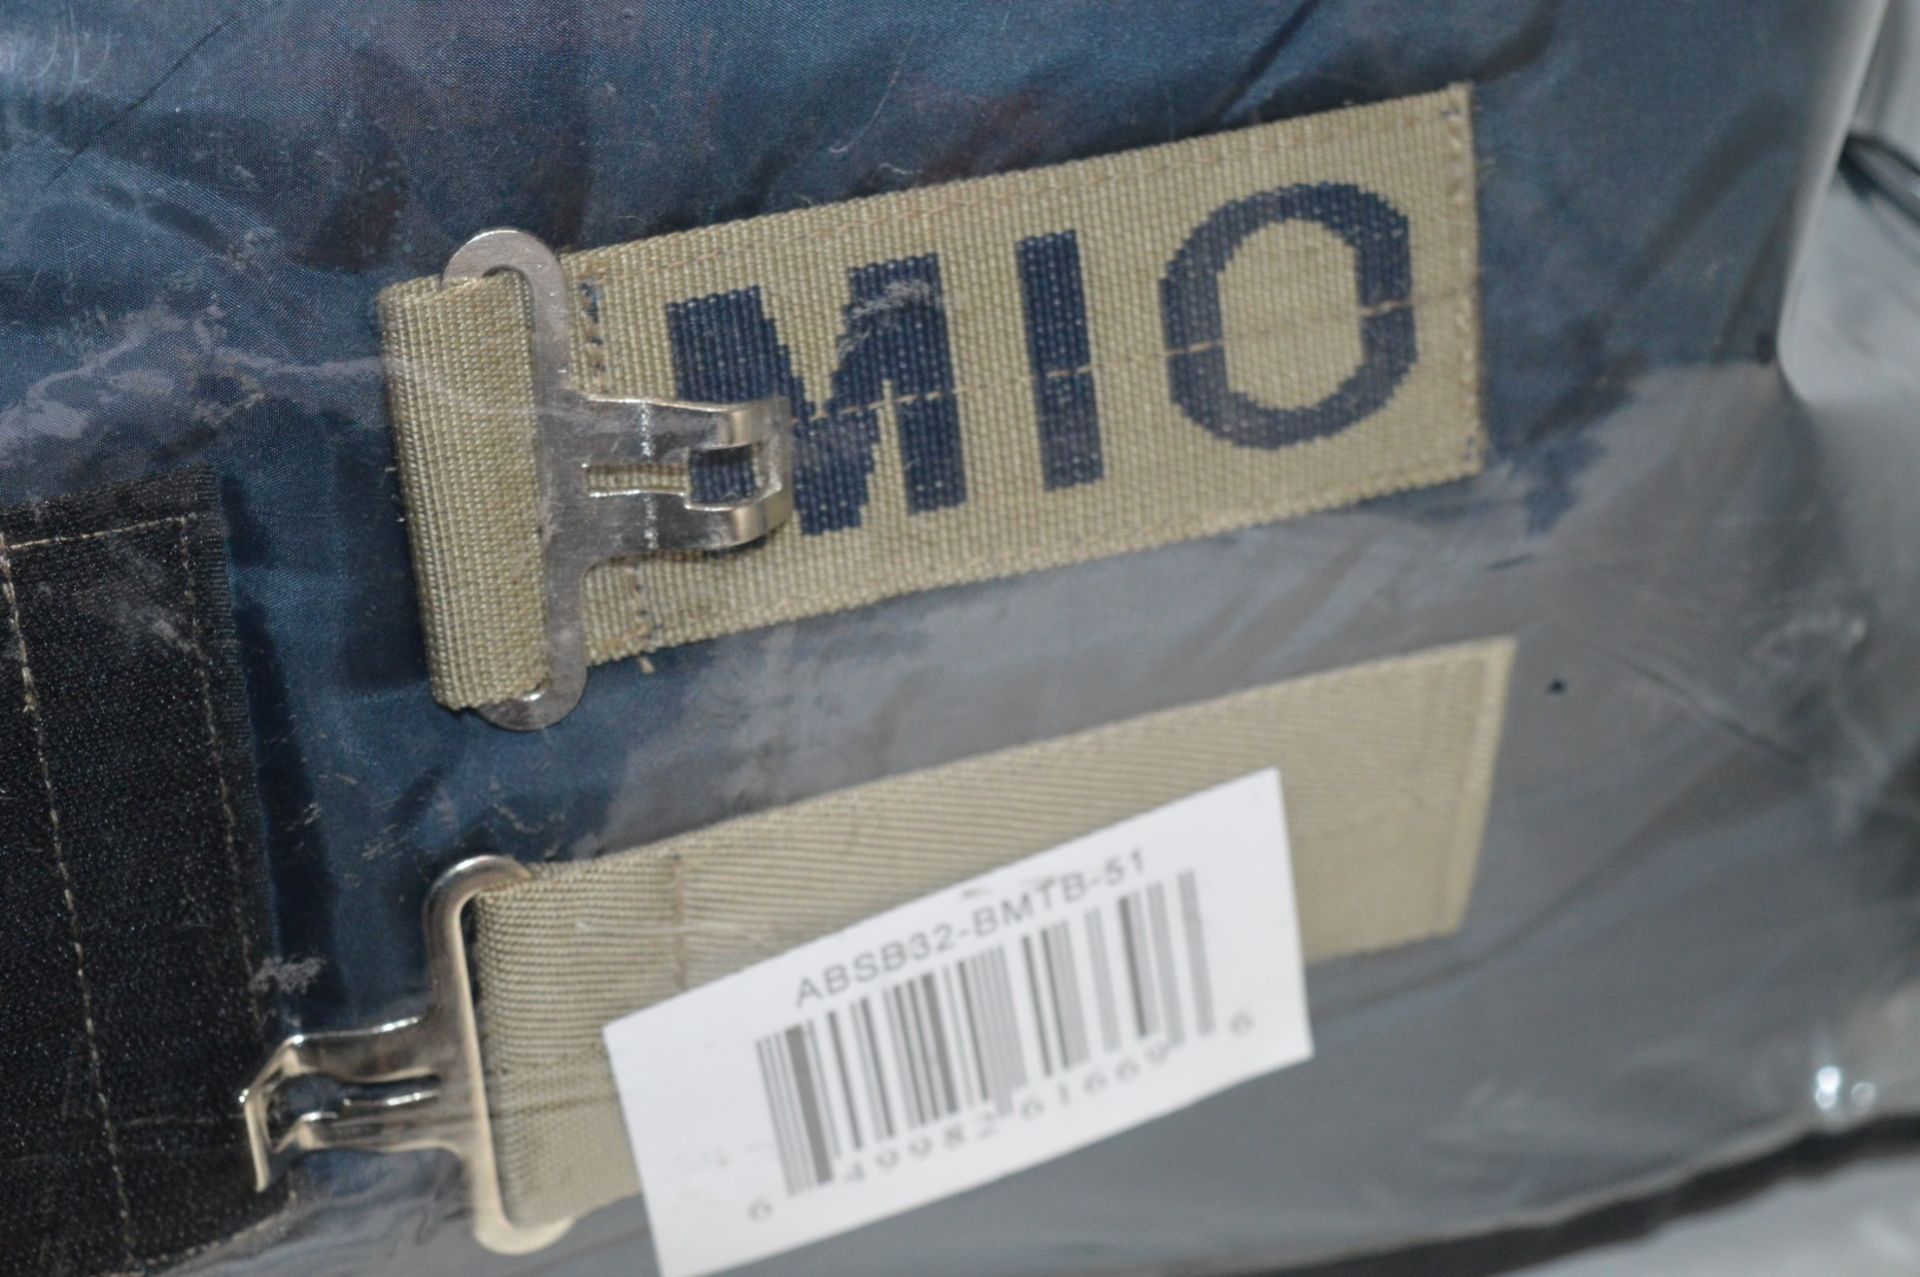 1 x Horseware Mio Insulator - Medium 150g in Navy - Size UK 51 - Product Code ABSB32-BMTB-51 - New - Image 4 of 5